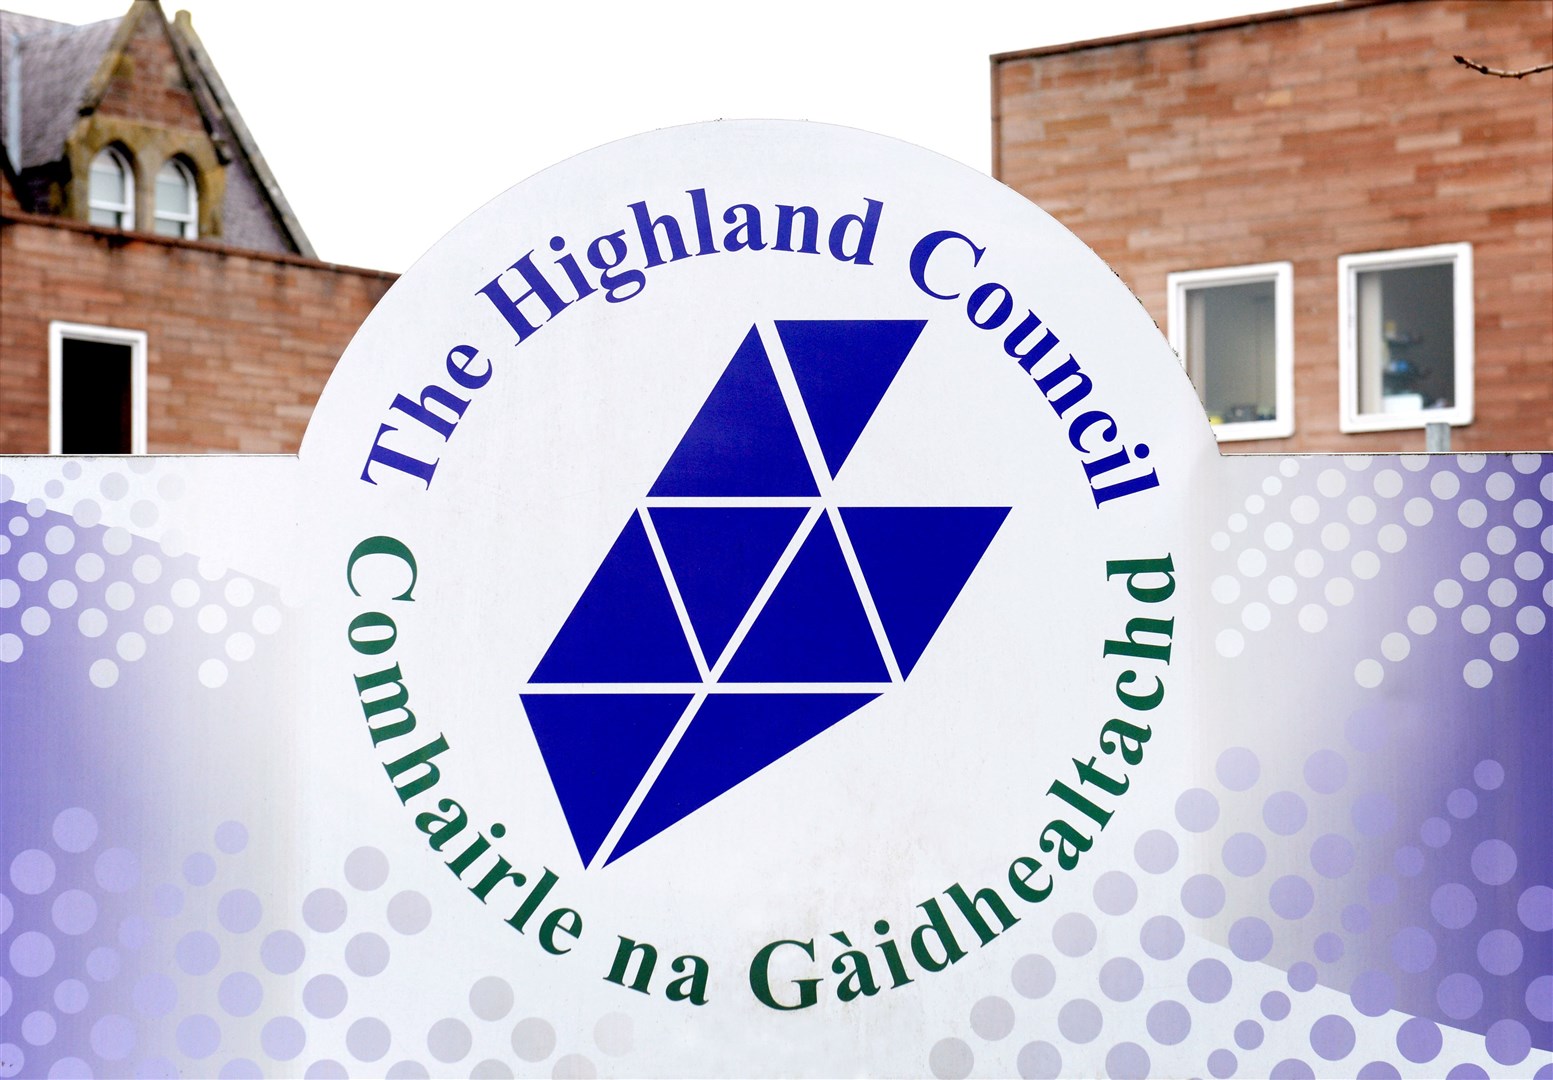 The Highland Council logo at its headquarters in Glenurquhart Road, Inverness.